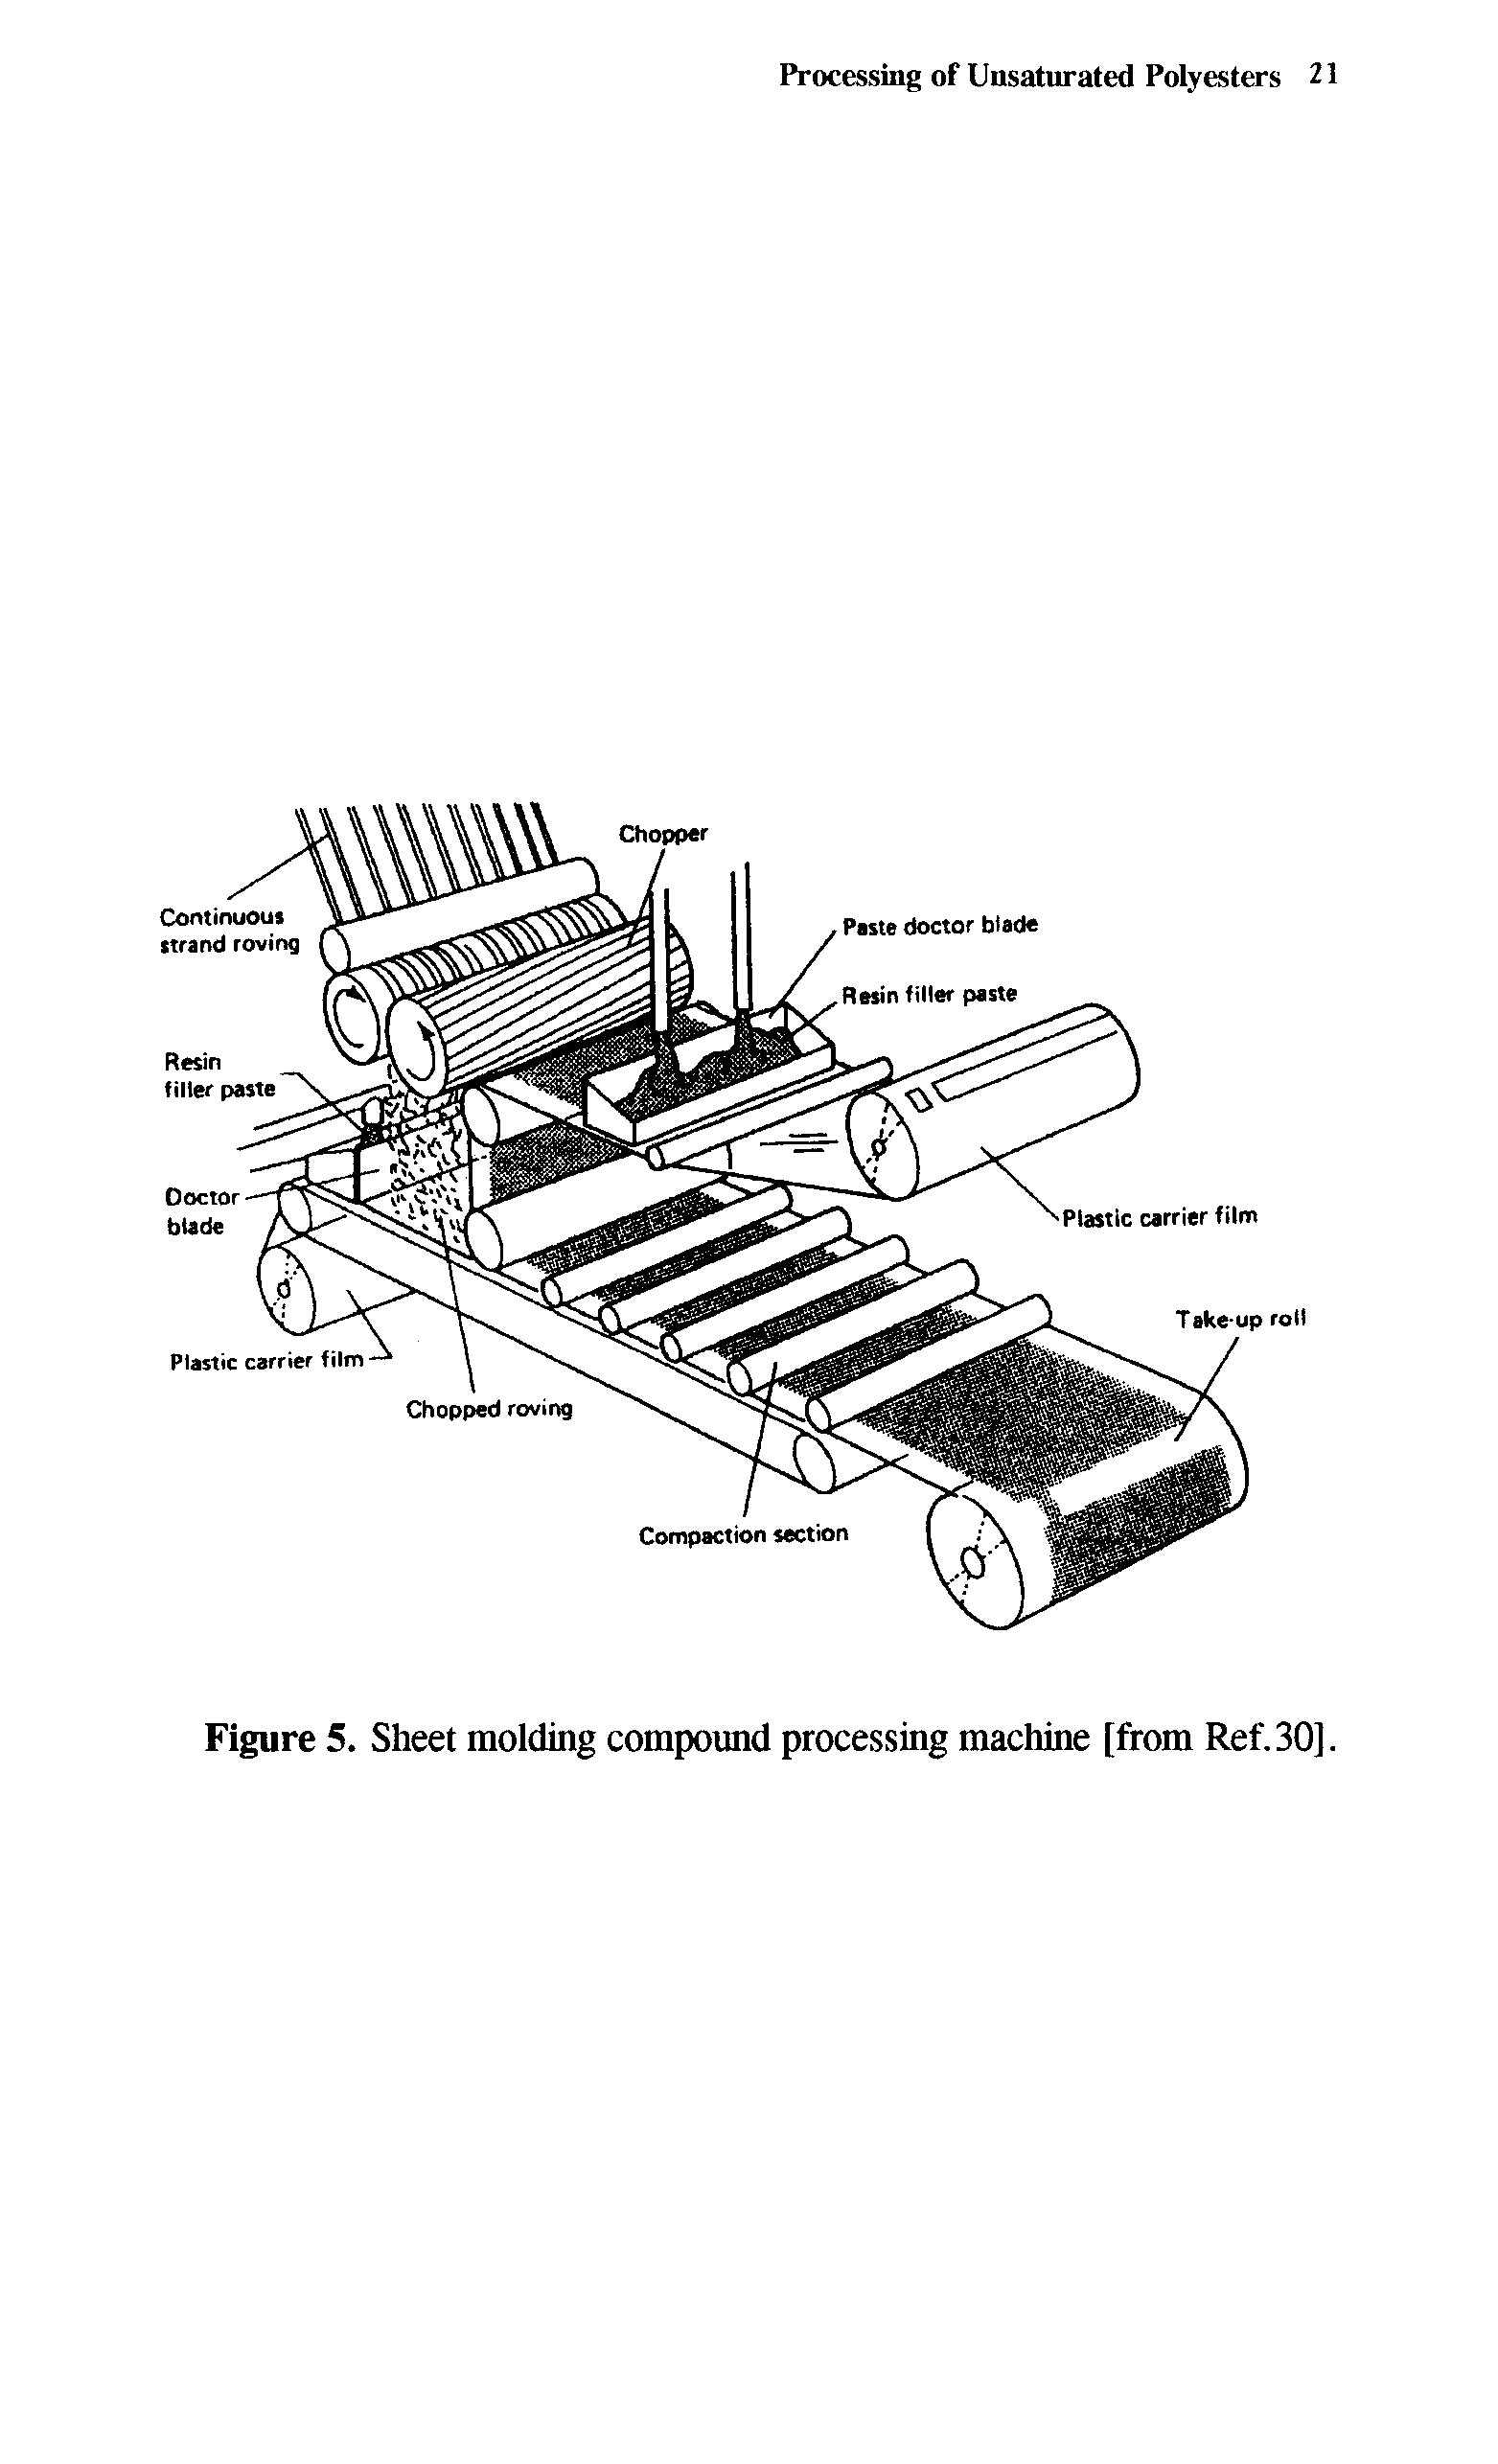 Figure 5. Sheet molding compound processing machine [from Ref. 30].